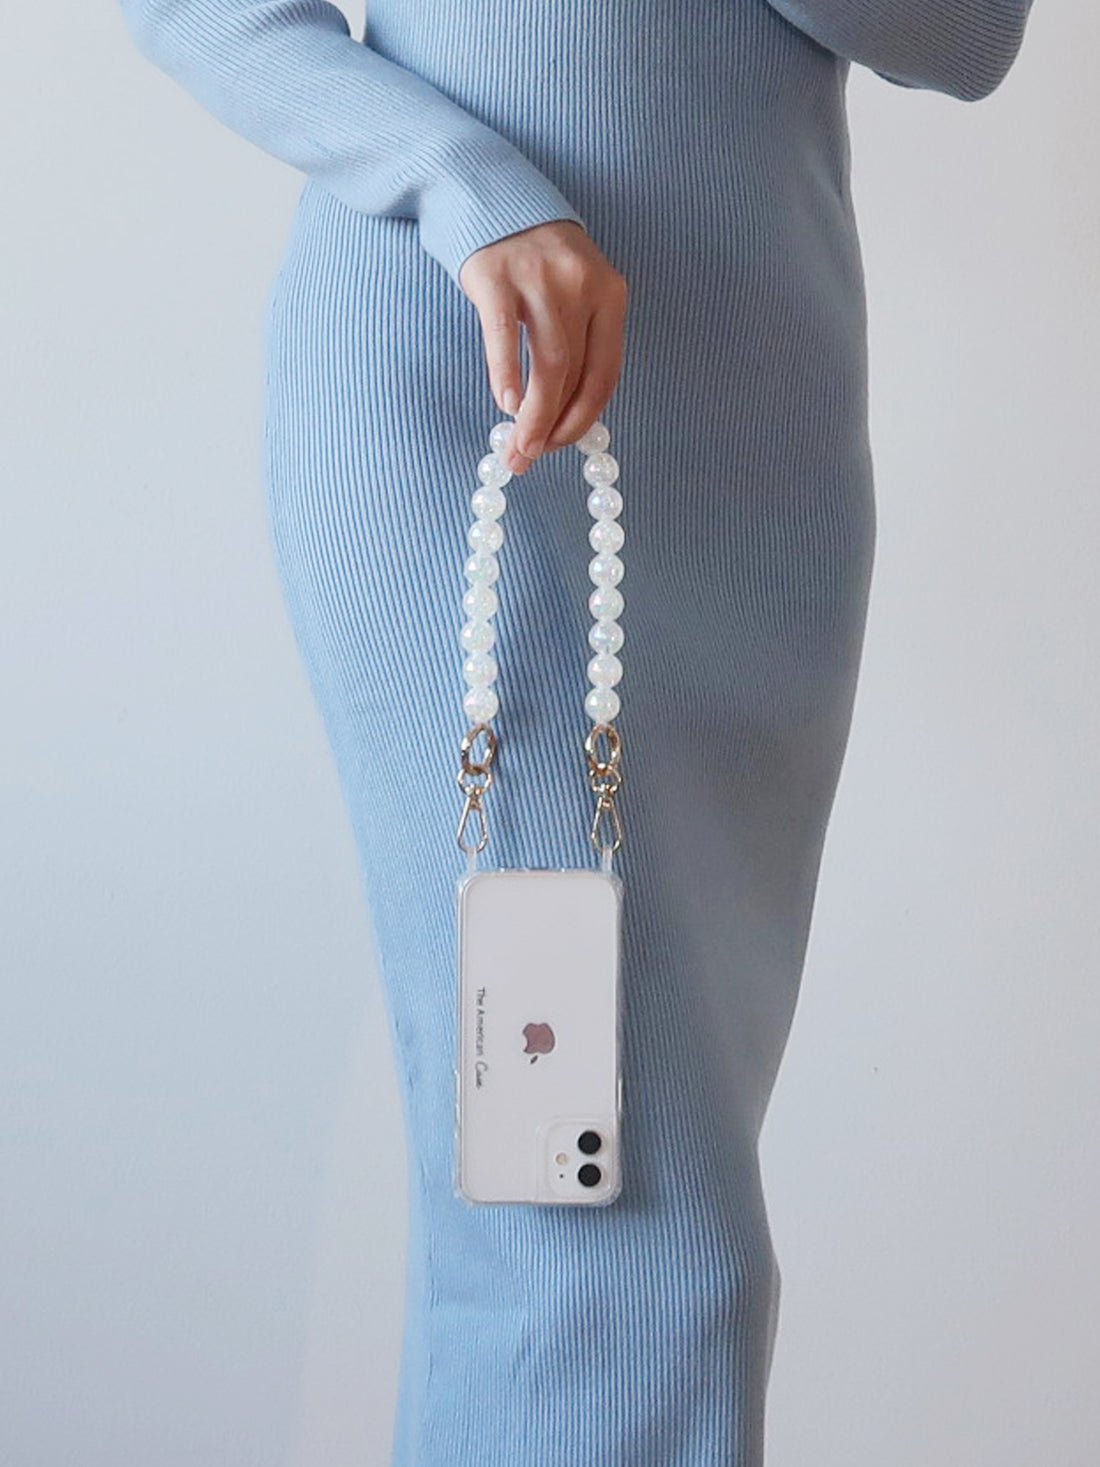 a Pastel white Crackle Bead Short Phone Chain with Golden Carabiners attache to a clear phone case with The American Case print hold by a lady by her hand